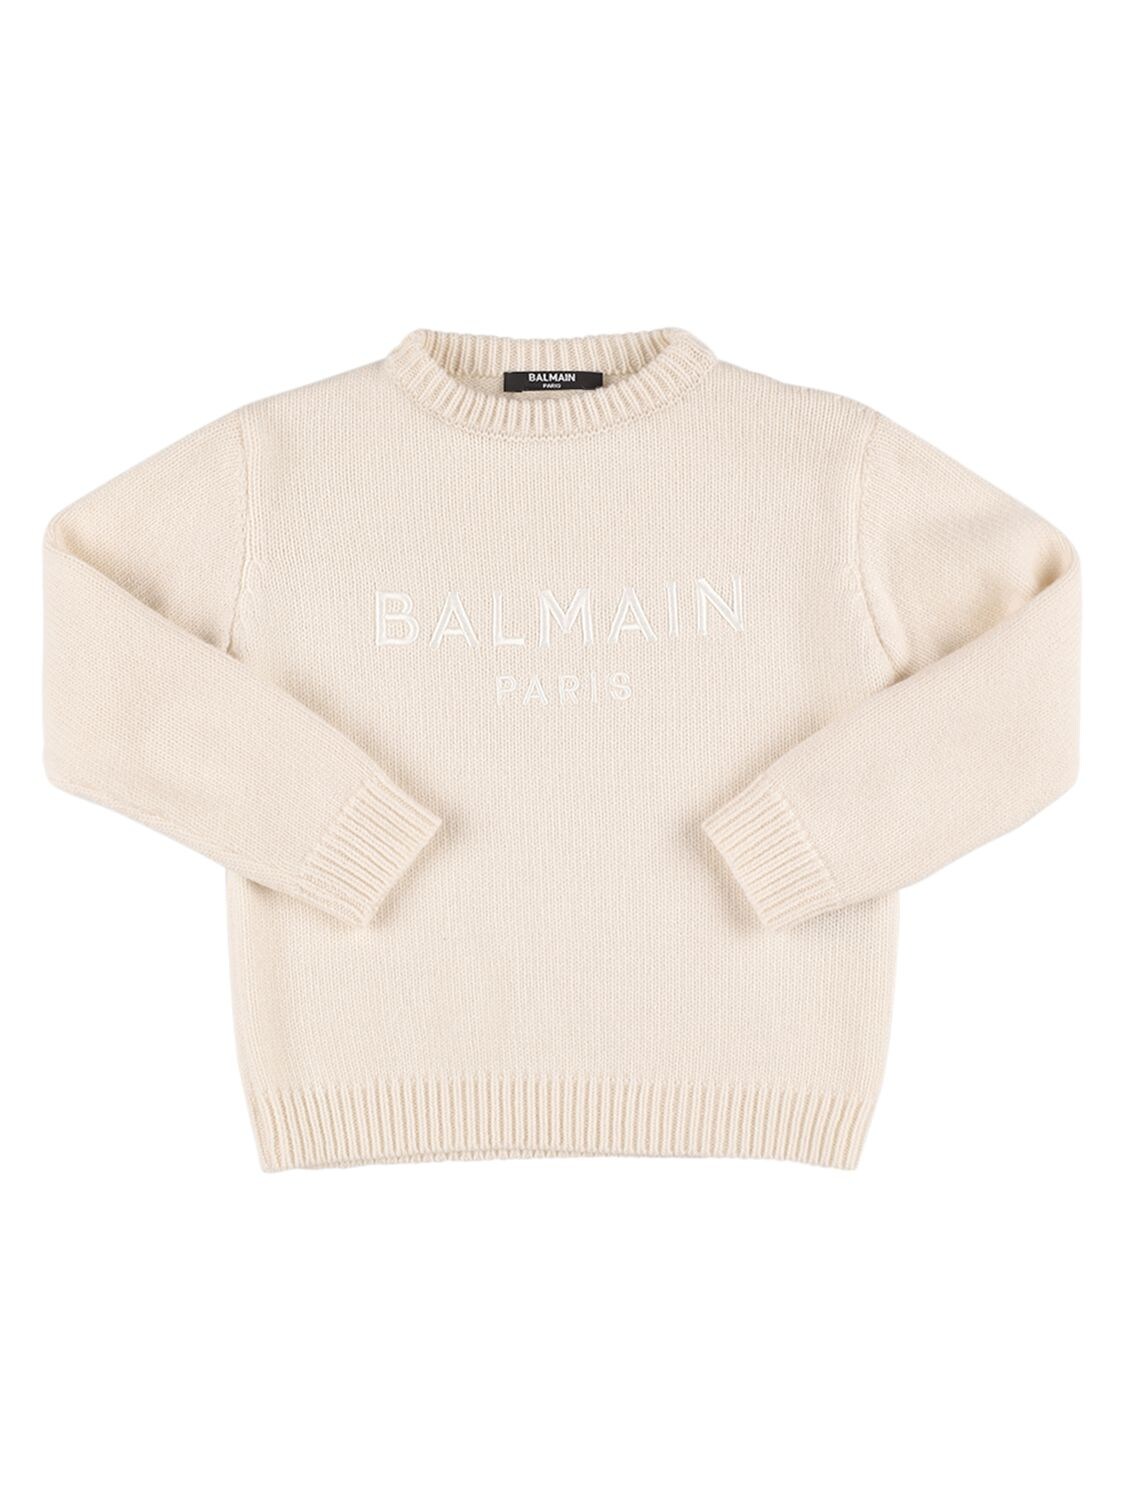 Balmain Kids' Cable Knit Wool & Cashmere Sweater In Ivory